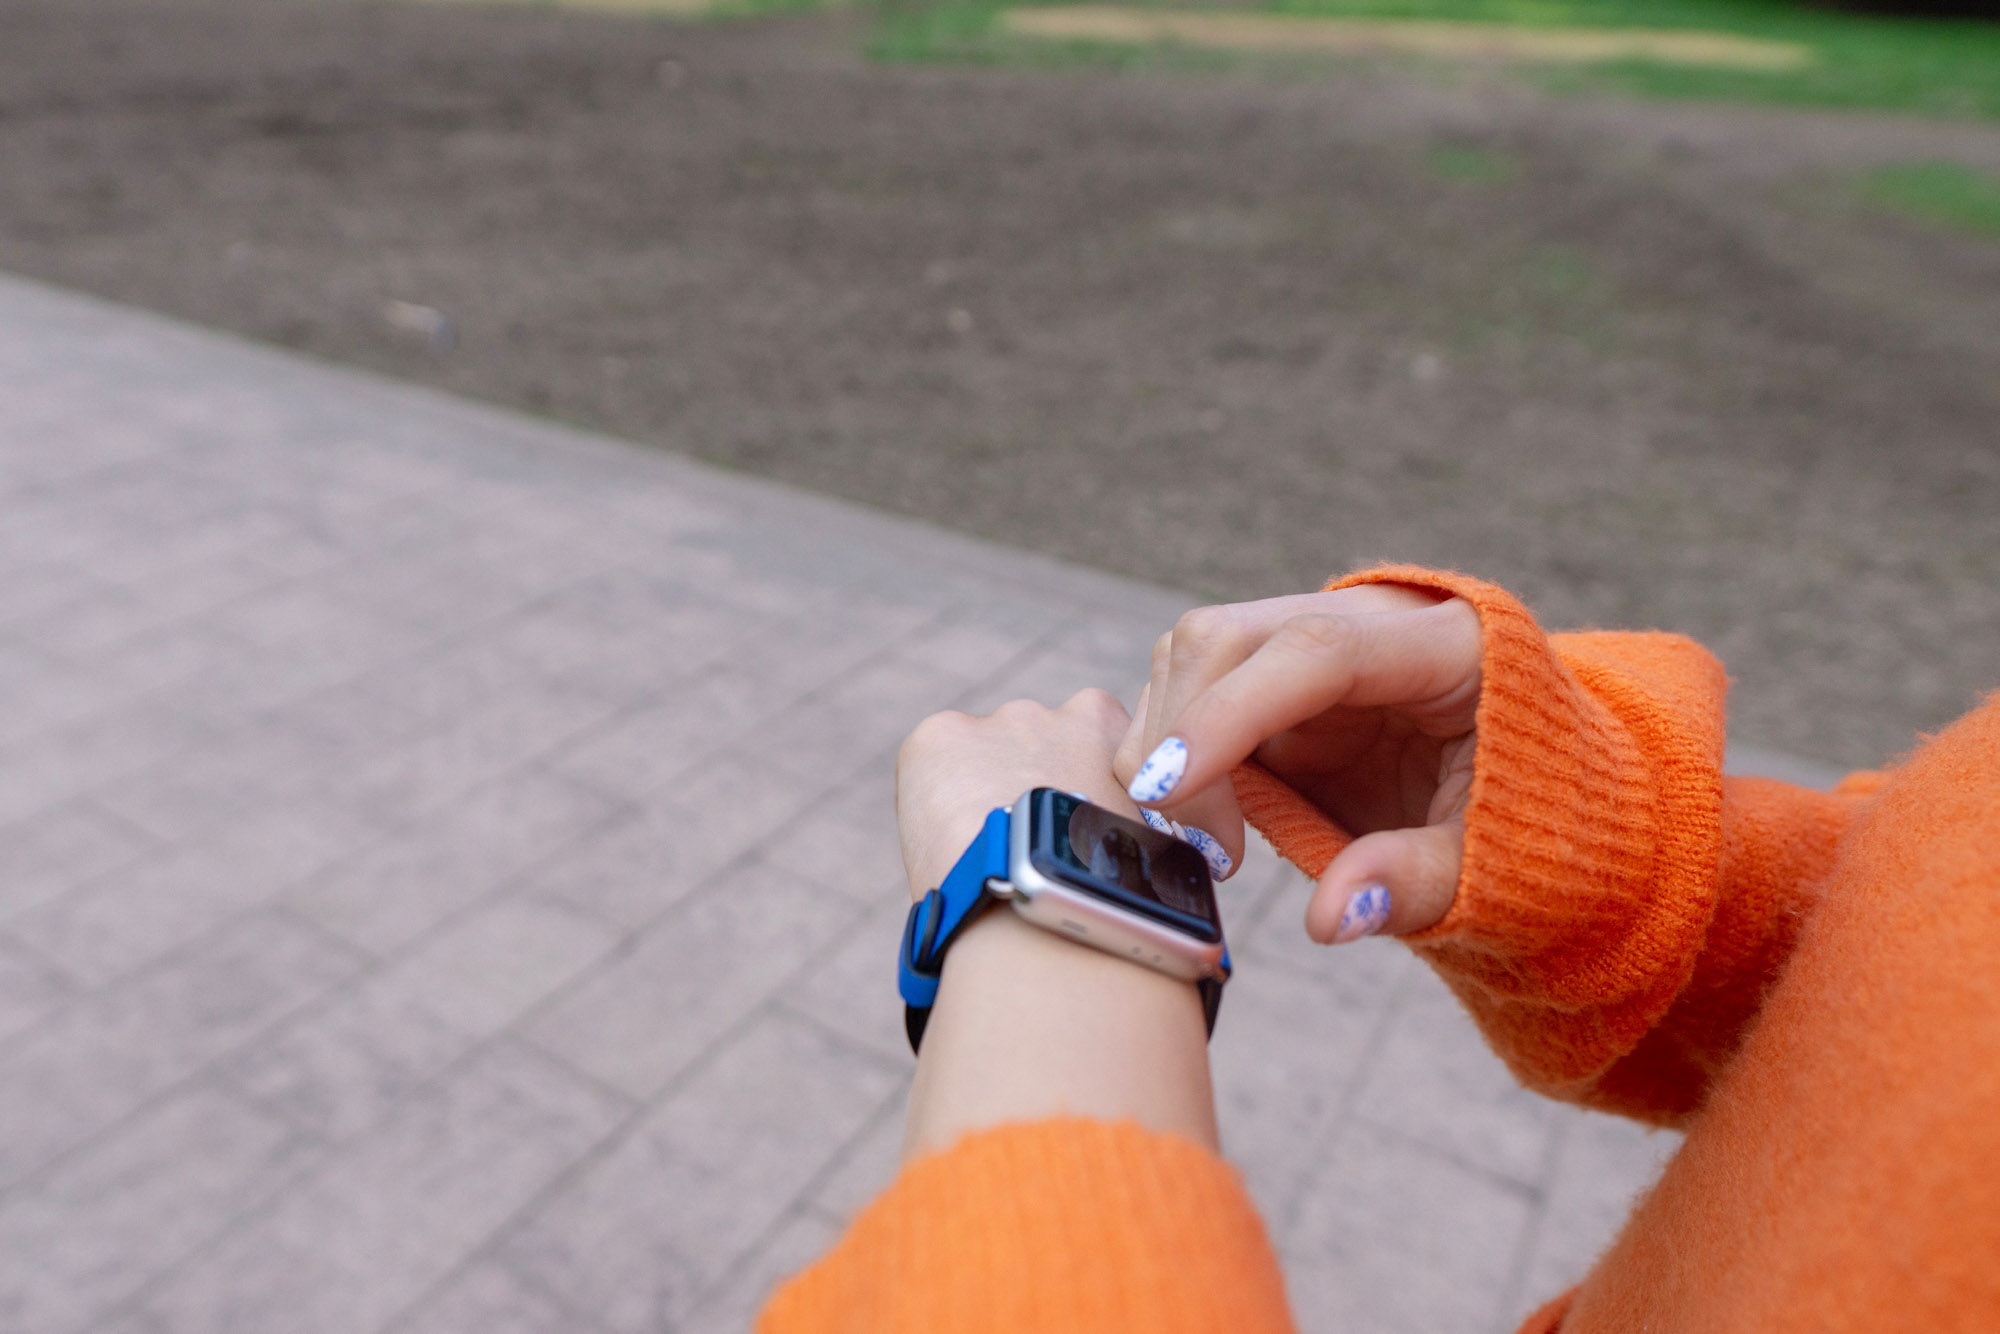 Close up of an Apple Watch on a woman’s wrist. The watch has a bright blue band. The woman is about to tap on the screen of the watch with her opposite hand.